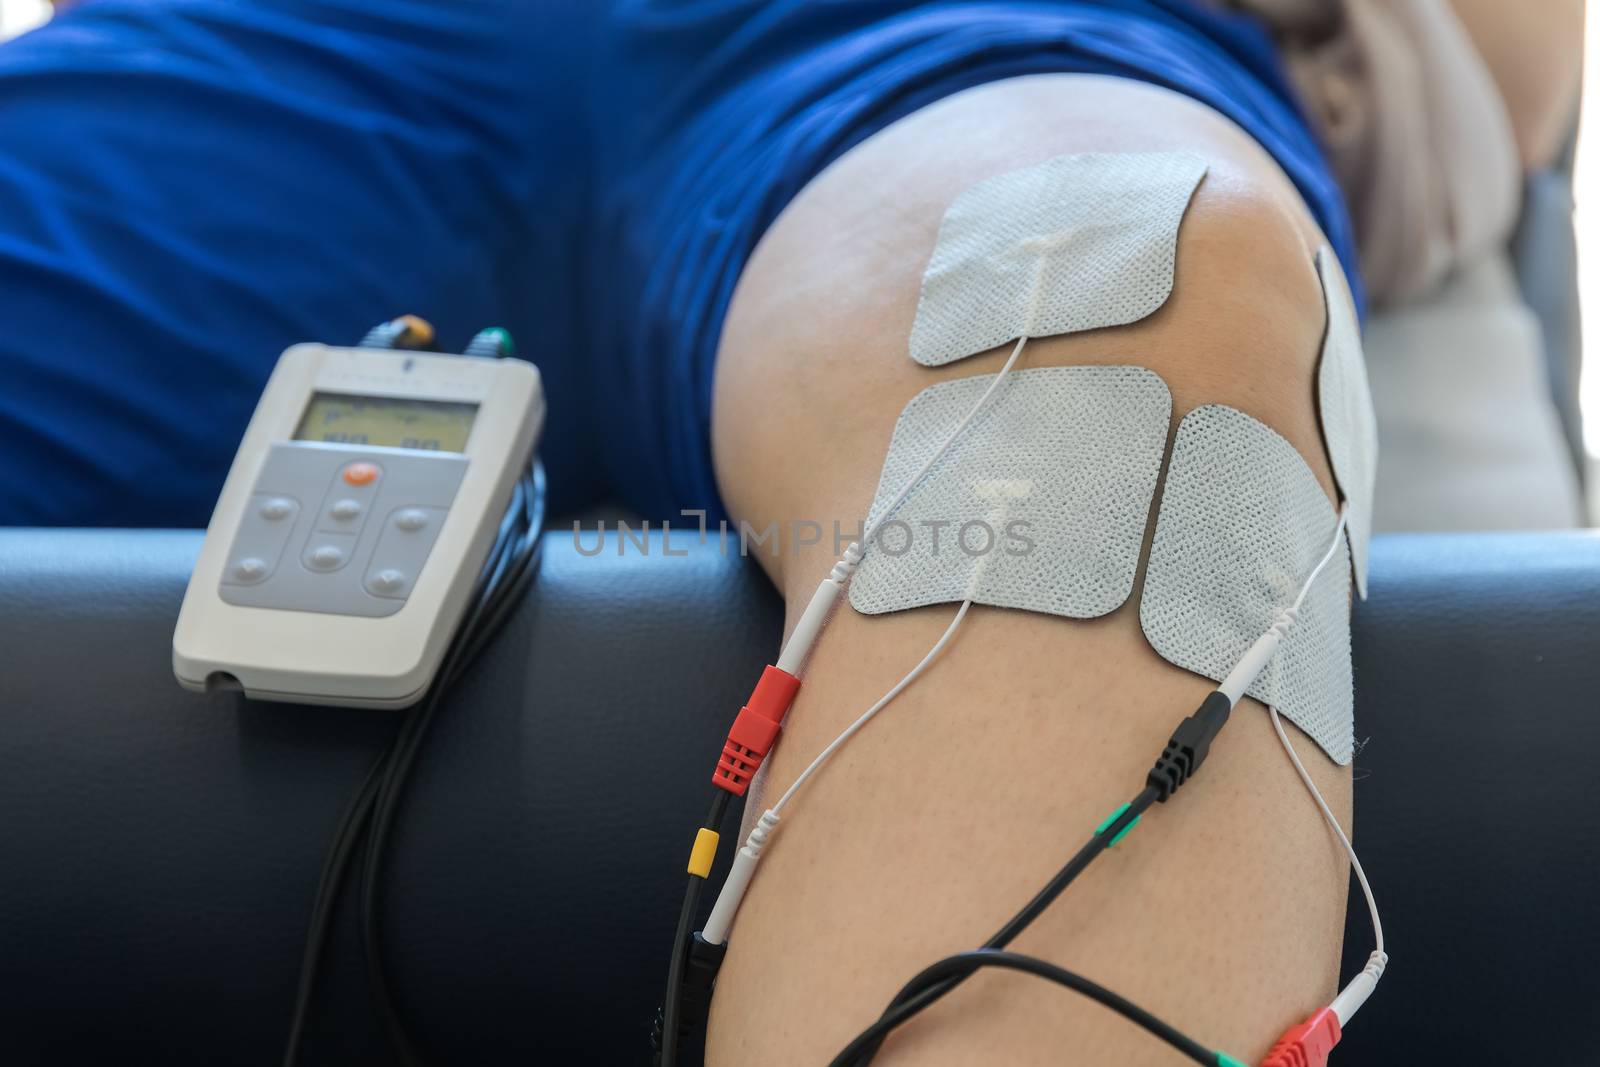 electronic therapy on knee used to treat pain. selective focus by ververidis